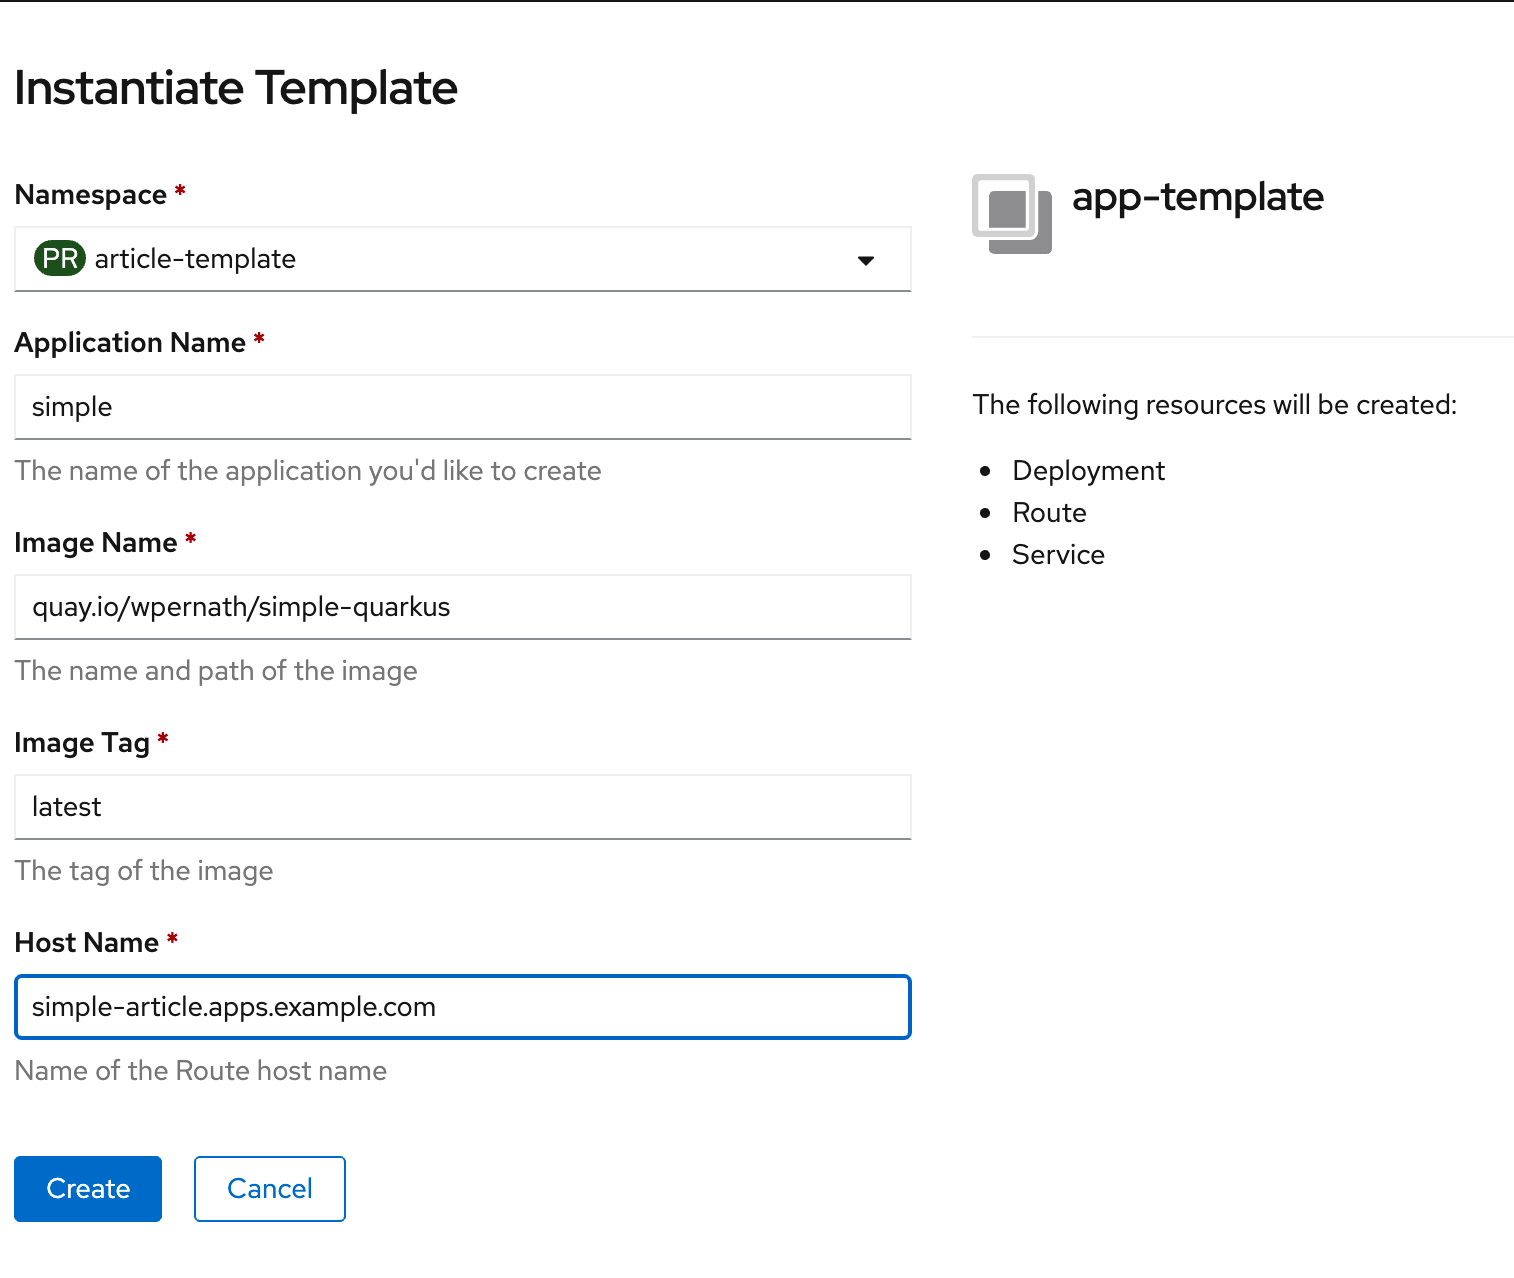 Image 4: Template instantiation with required fields